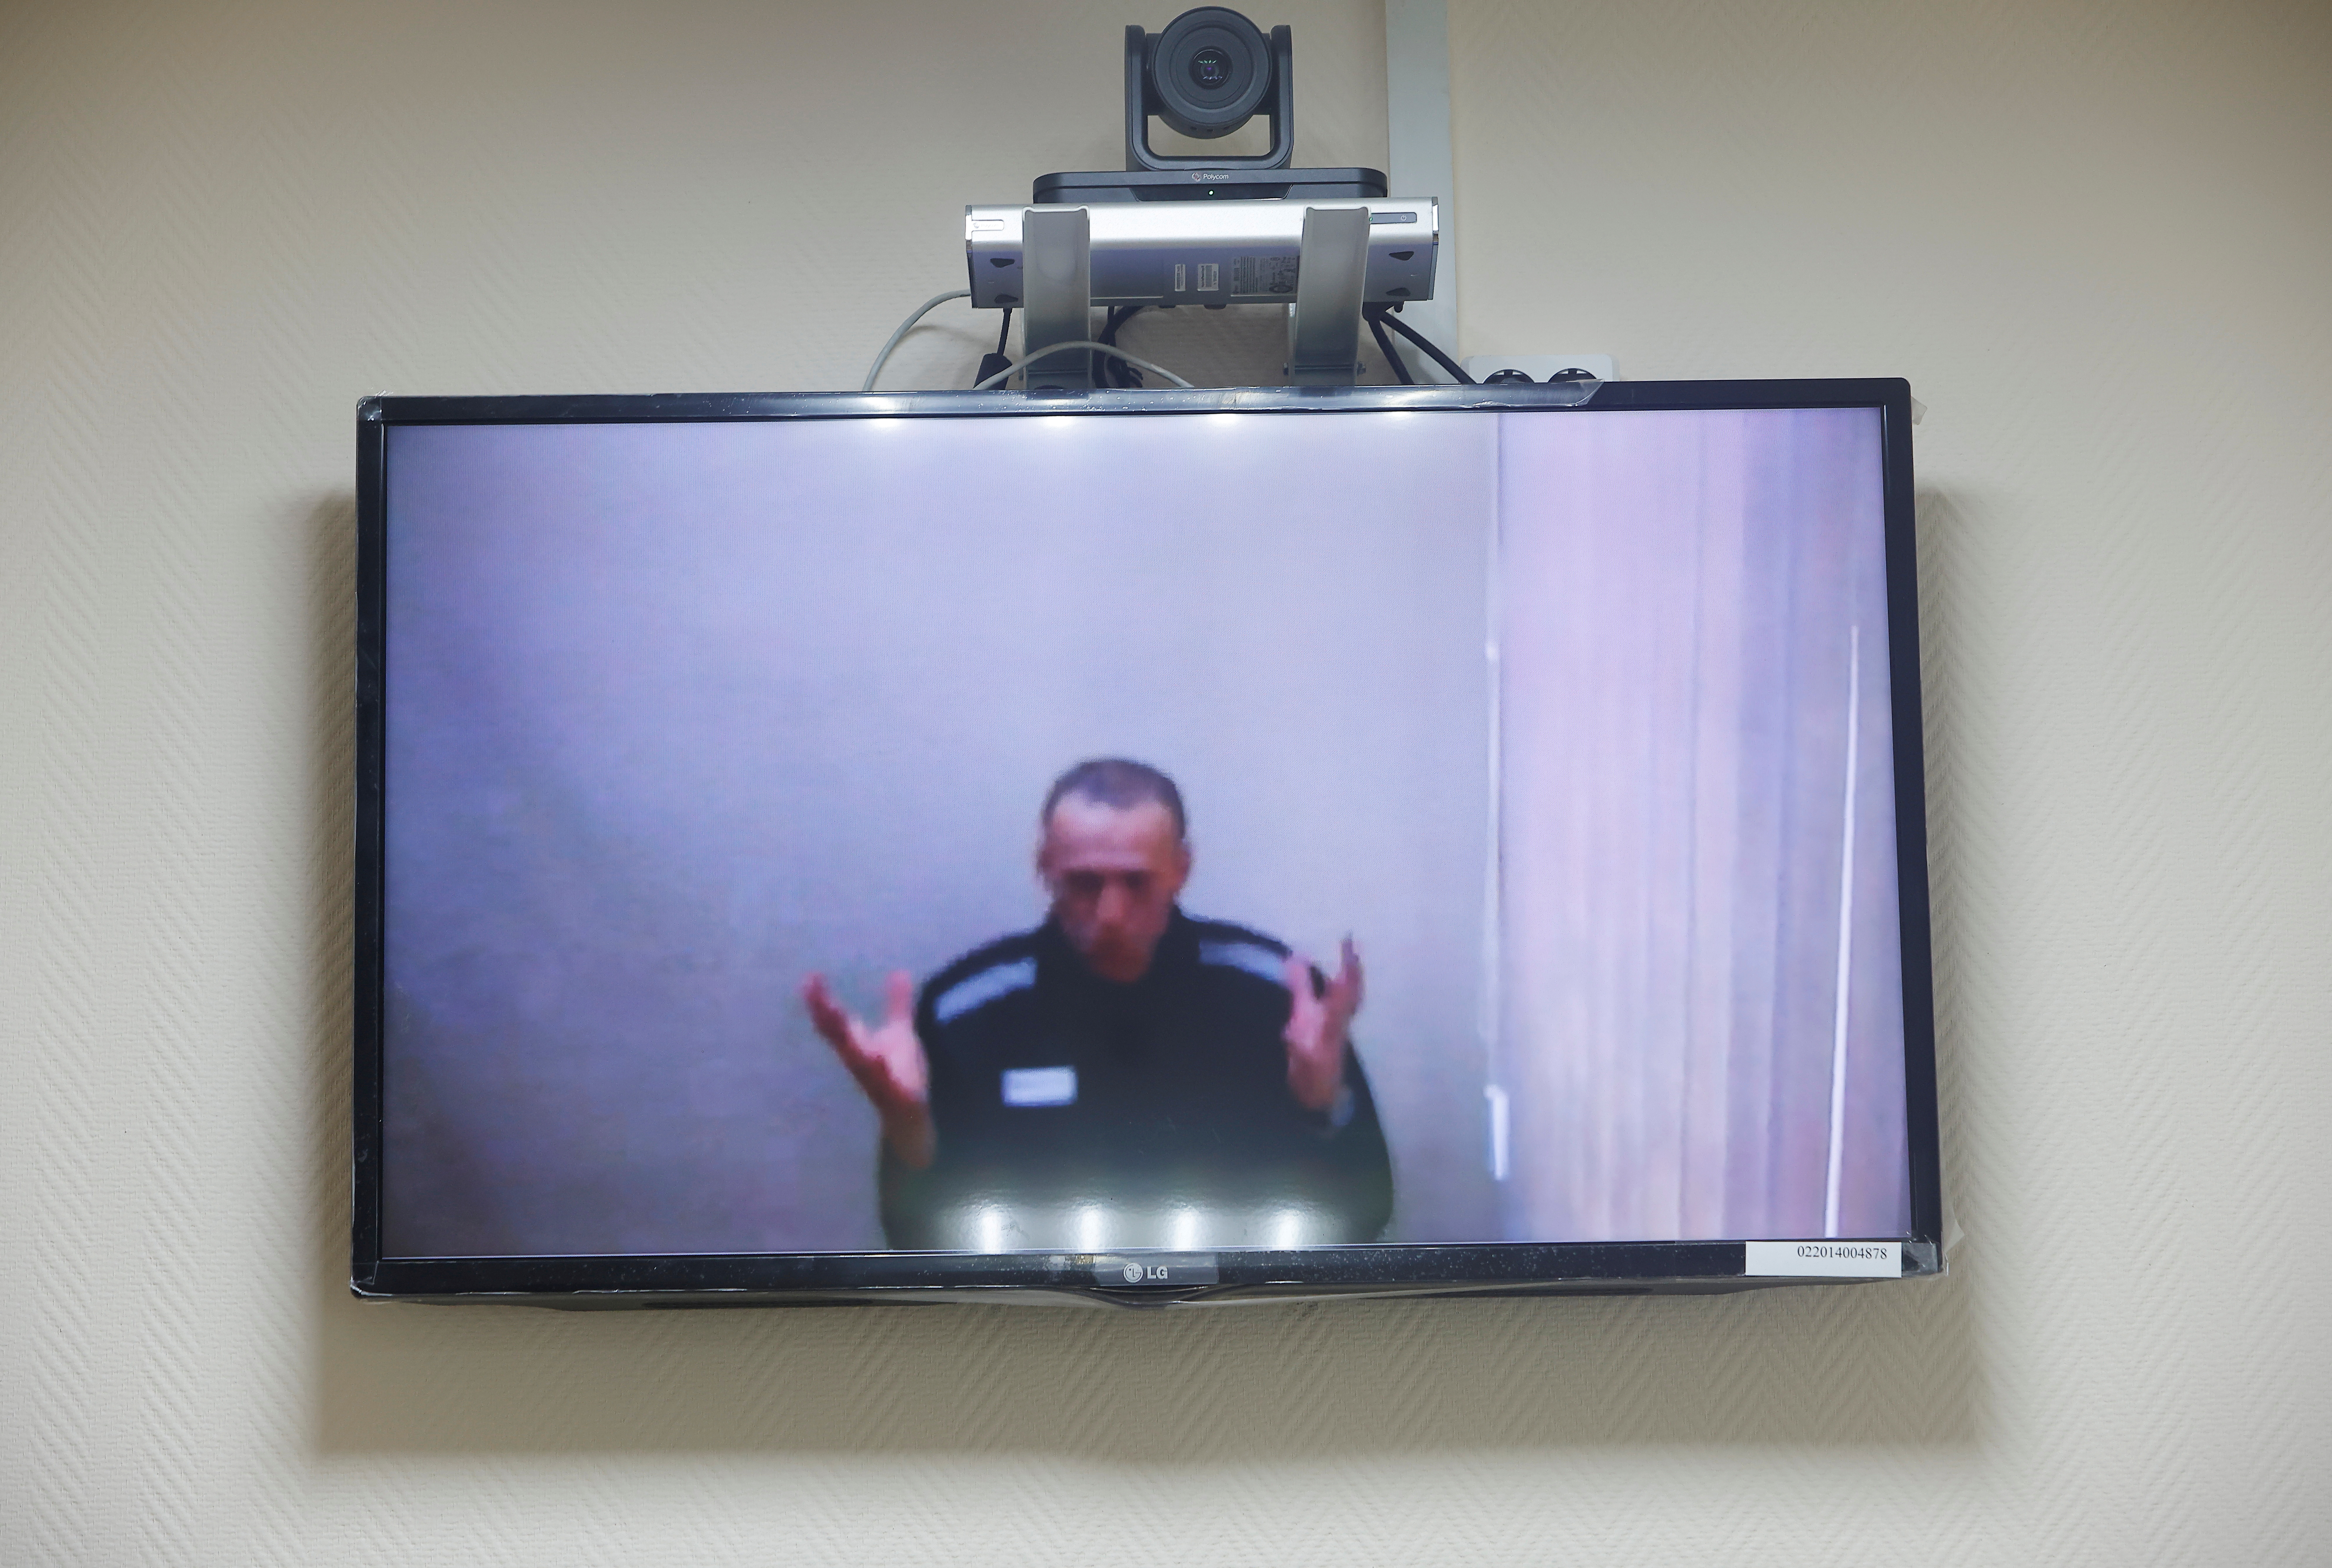 Russian opposition leader Alexei Navalny is seen on a screen via a video link during a hearing to consider his lawsuits against the penal colony over detention conditions there, at the Petushki district court in Petushki, Russia May 26, 2021. REUTERS/Maxim Shemetov